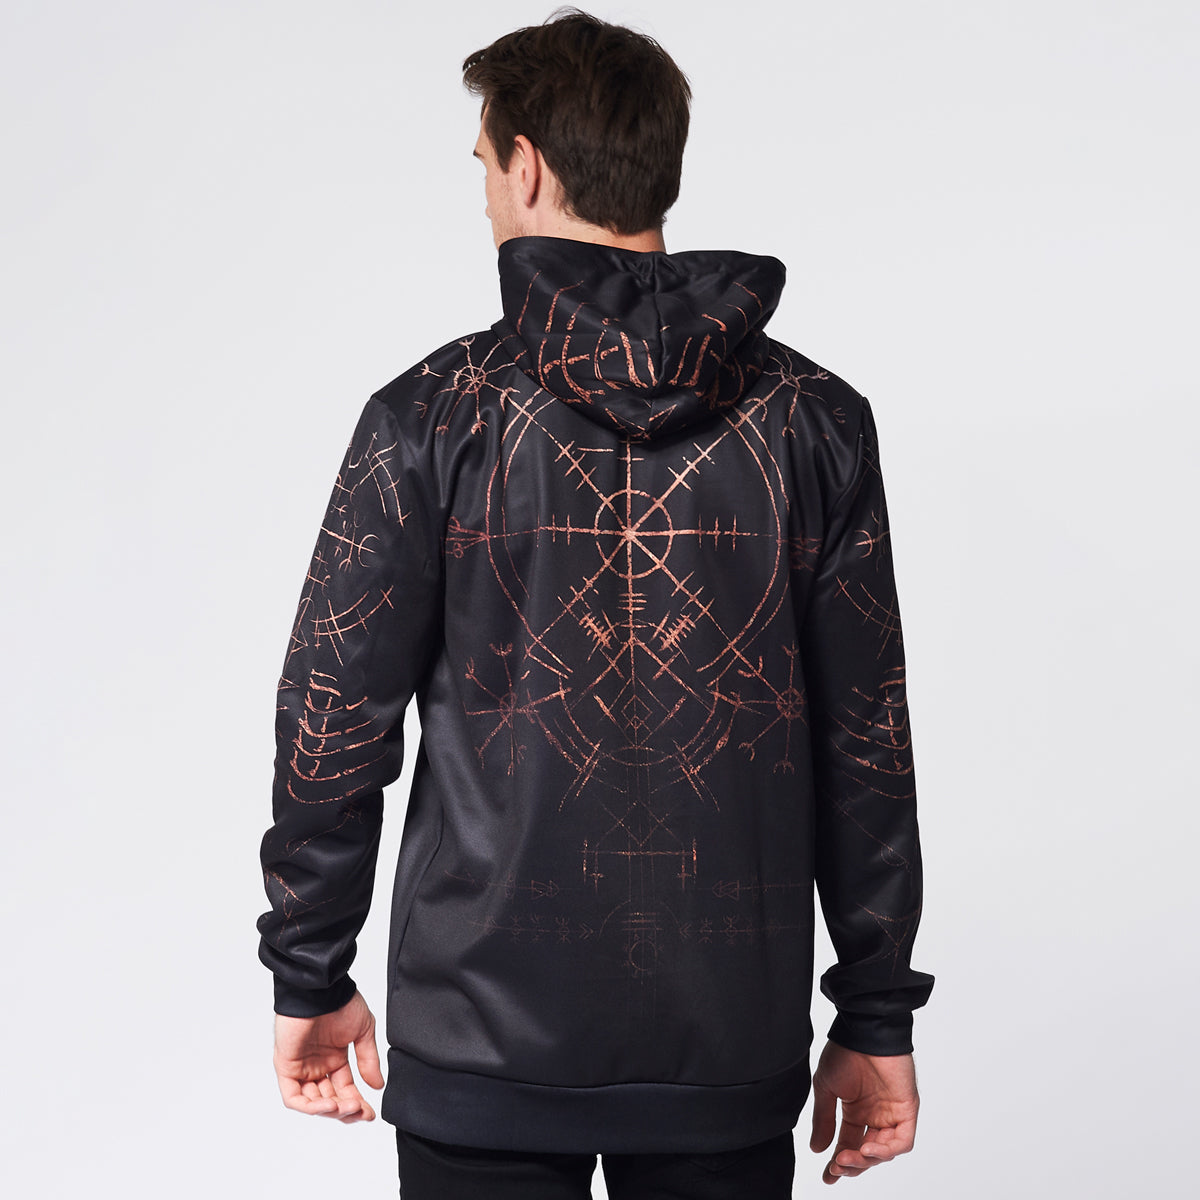 The Stave Pullover Hoodie